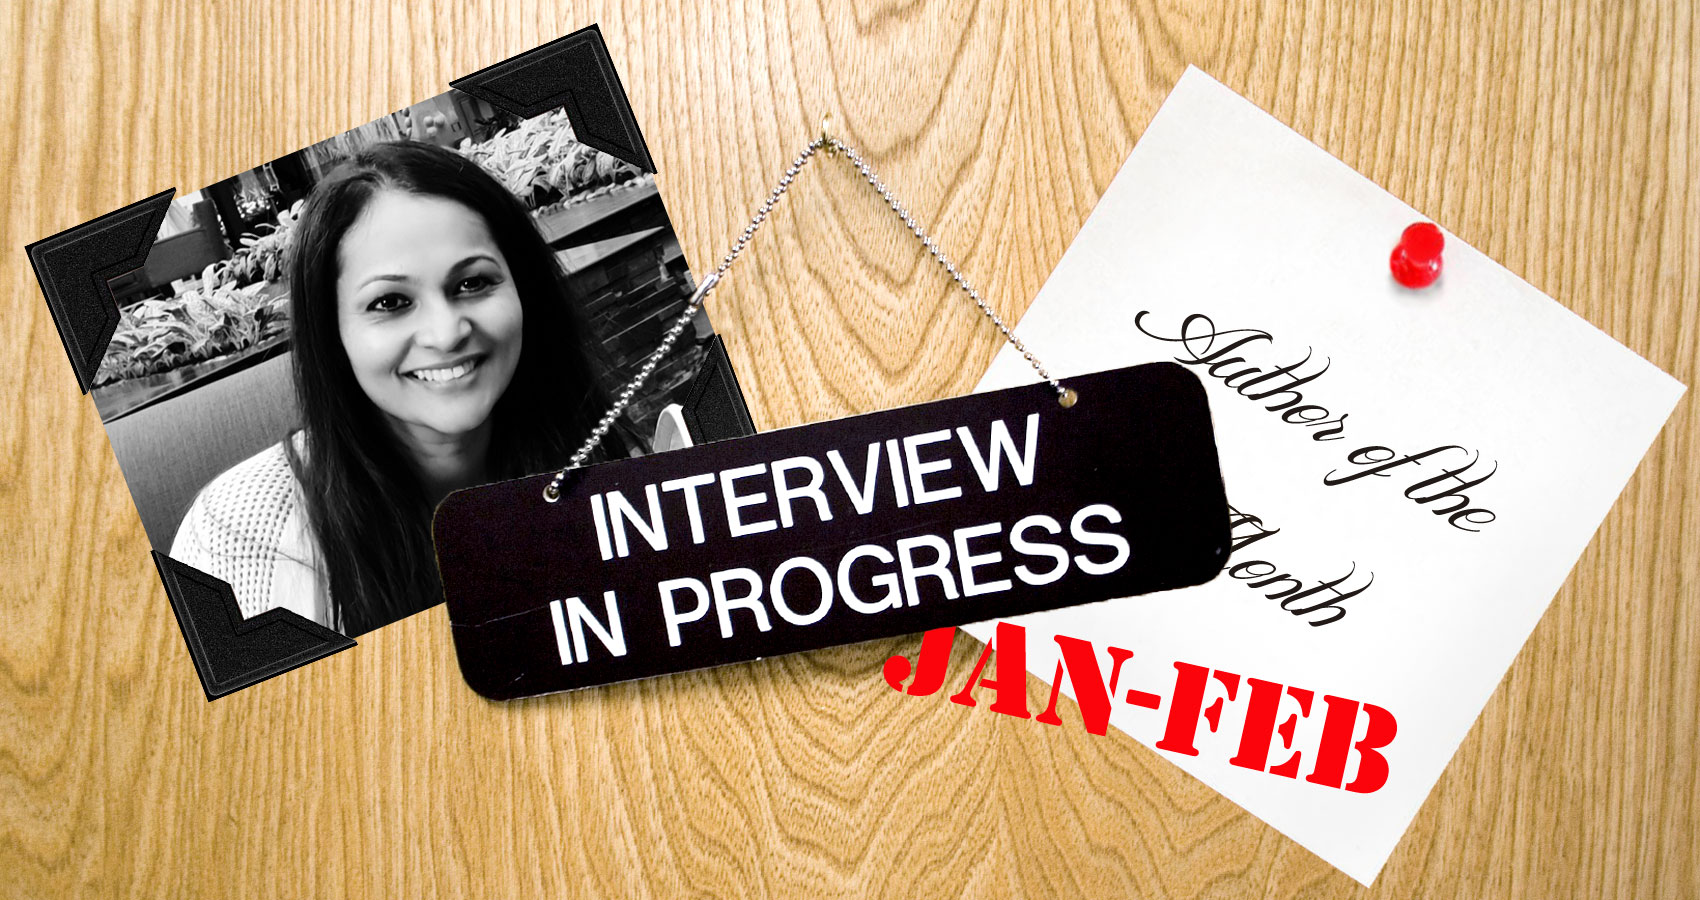 Interview Q&A with Smitha Vishwanath, a writer at Spillwords.com